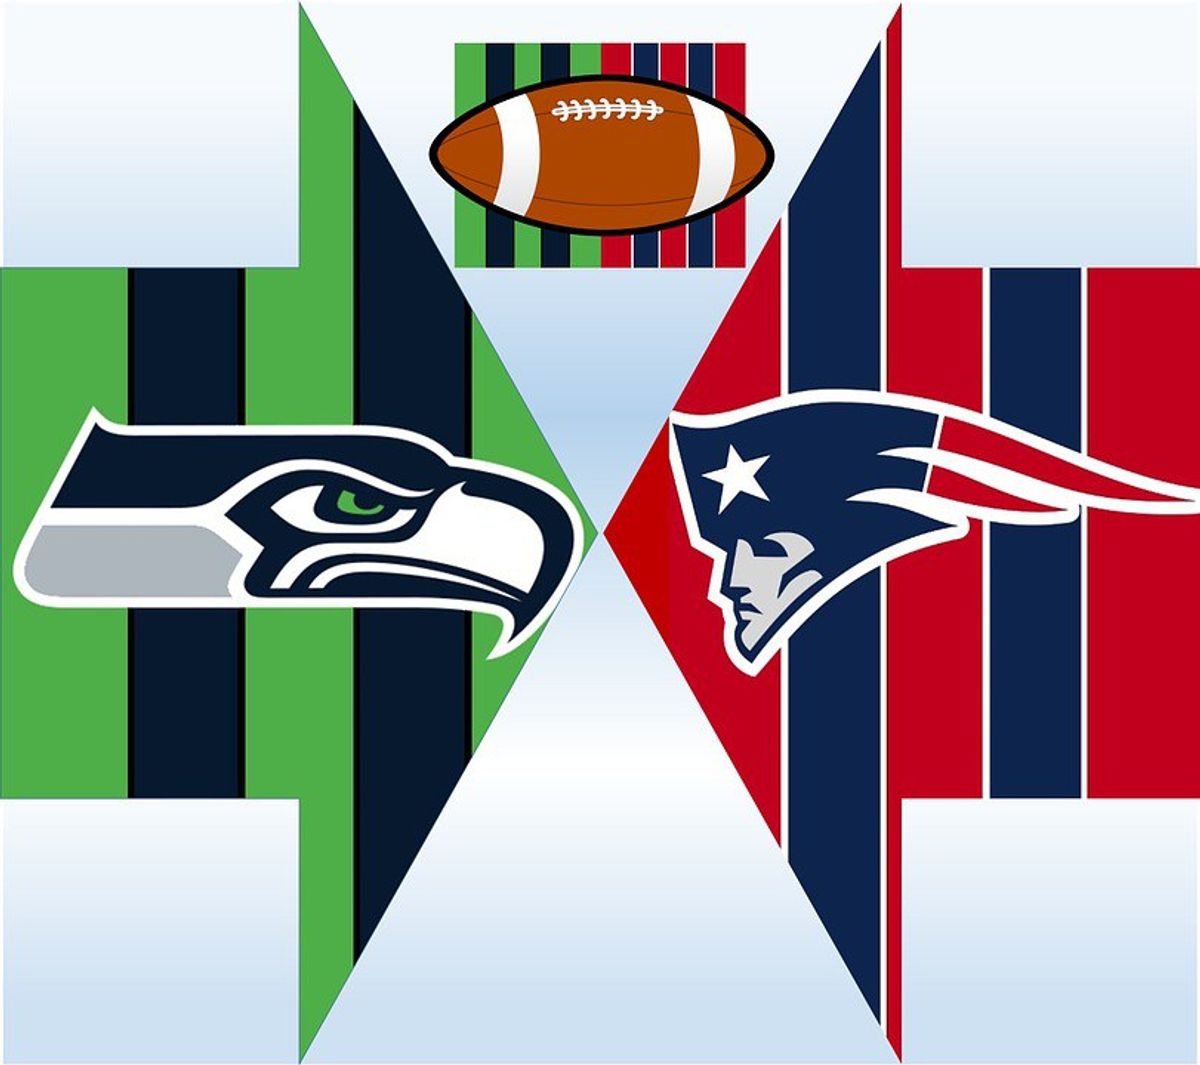 Game Preview: The Super Bowl 49 Rematch